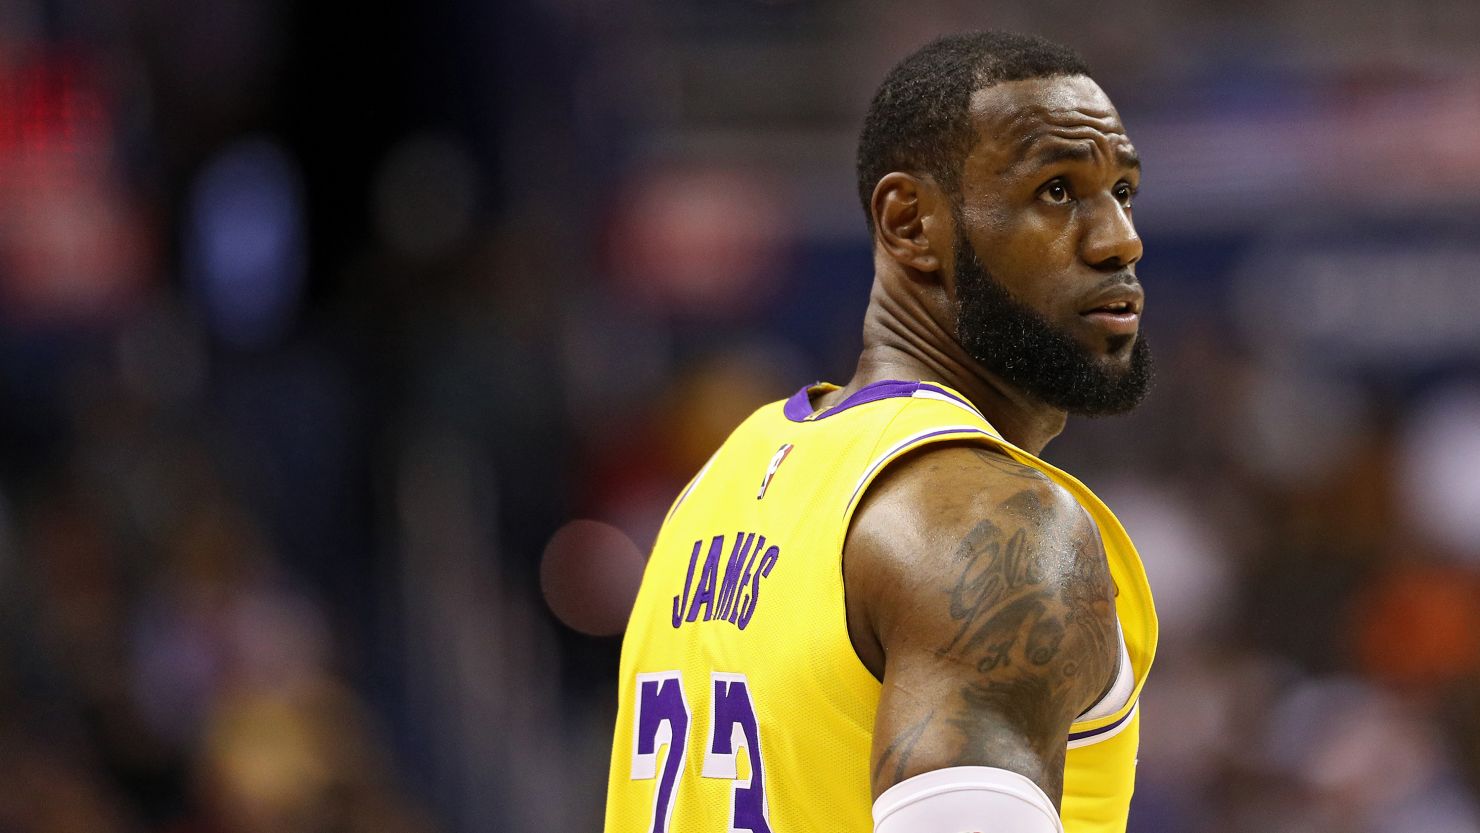 LeBron James apologized for a recent Instagram post after the Lakers lost to the Grizzlies.